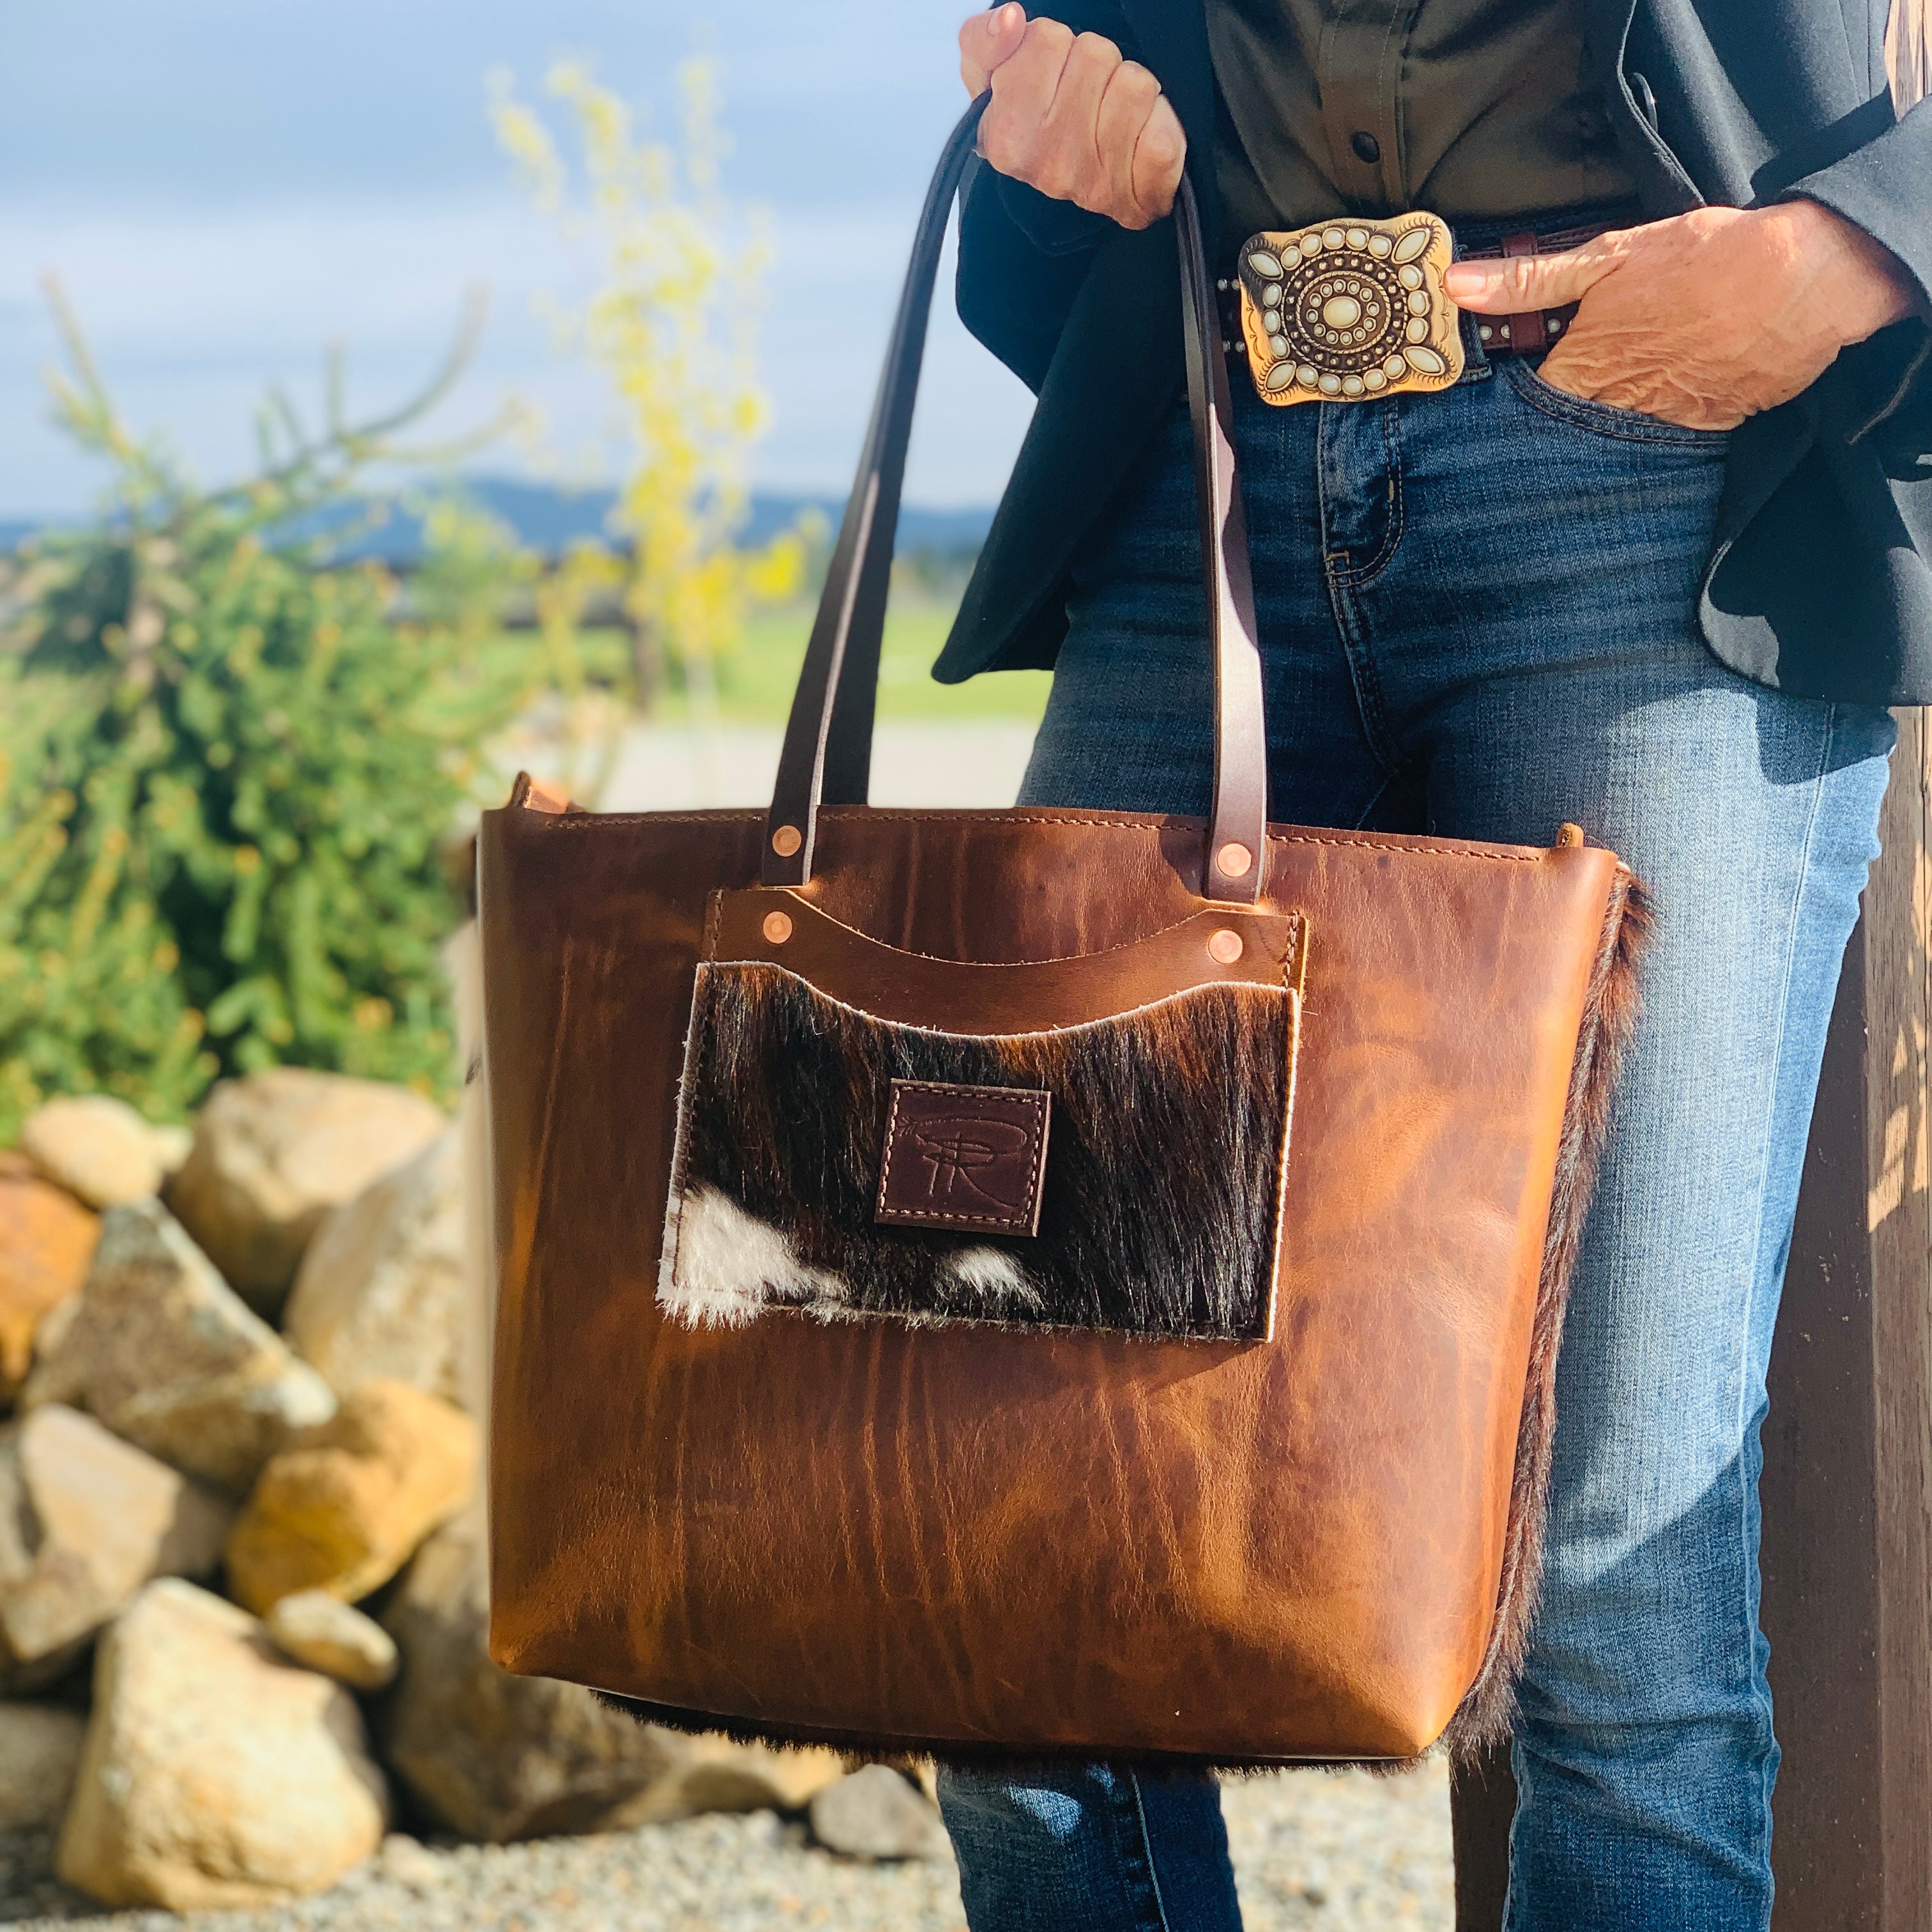 handcrafted leather goods custom made idaho handbags belts wallets leather crafts shopping retail boutique